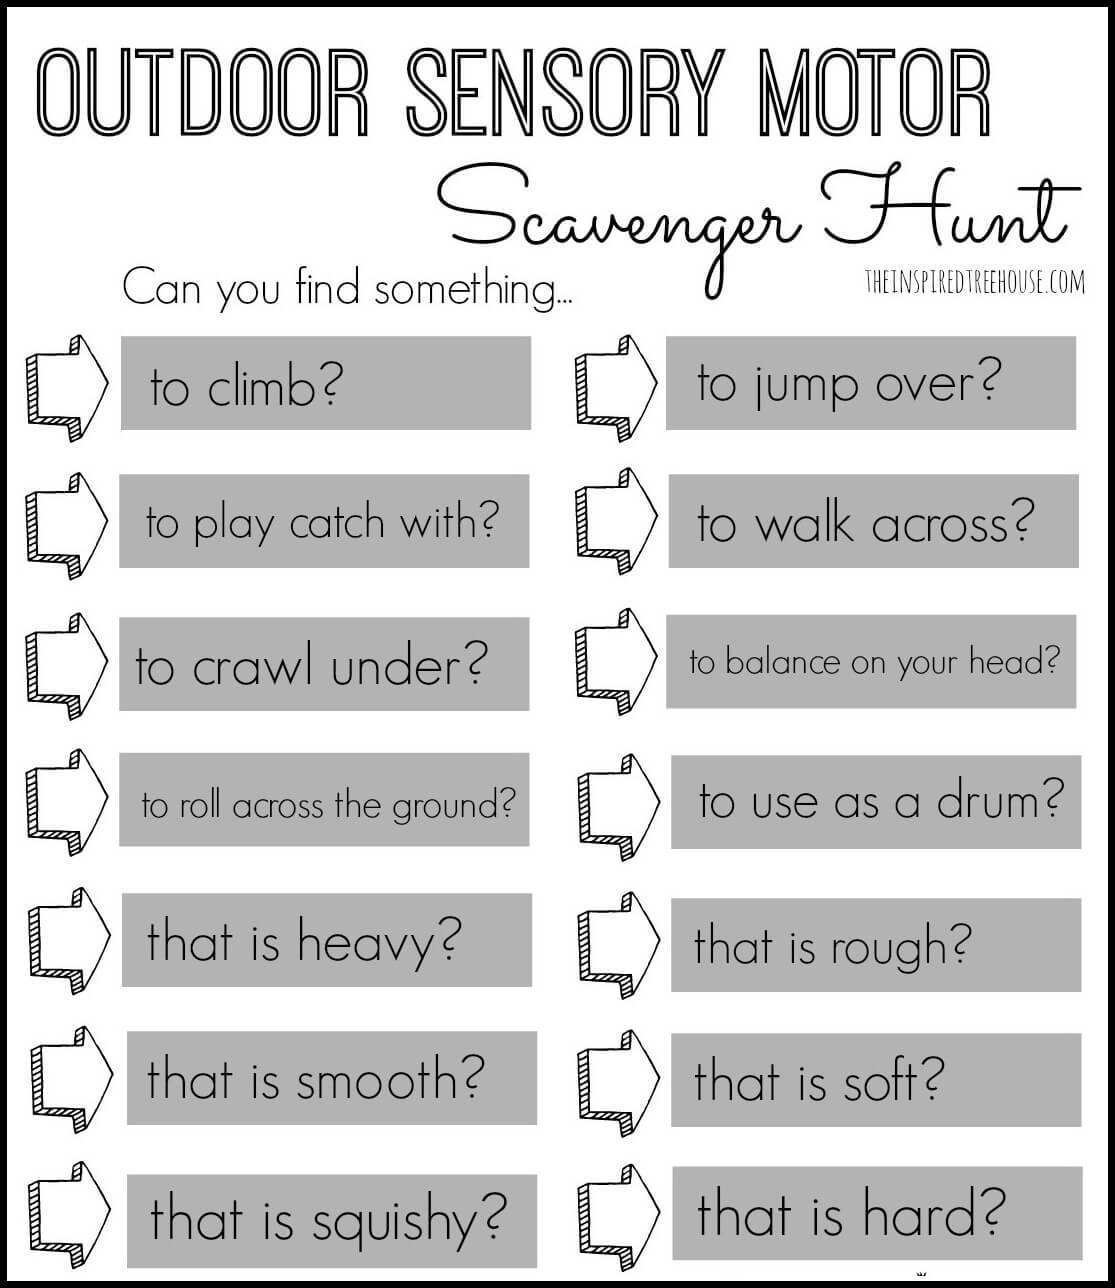 10 Great Scavenger Hunt Ideas For Adults Outside activities for kids sensory scavenger hunt sensory motor 2022